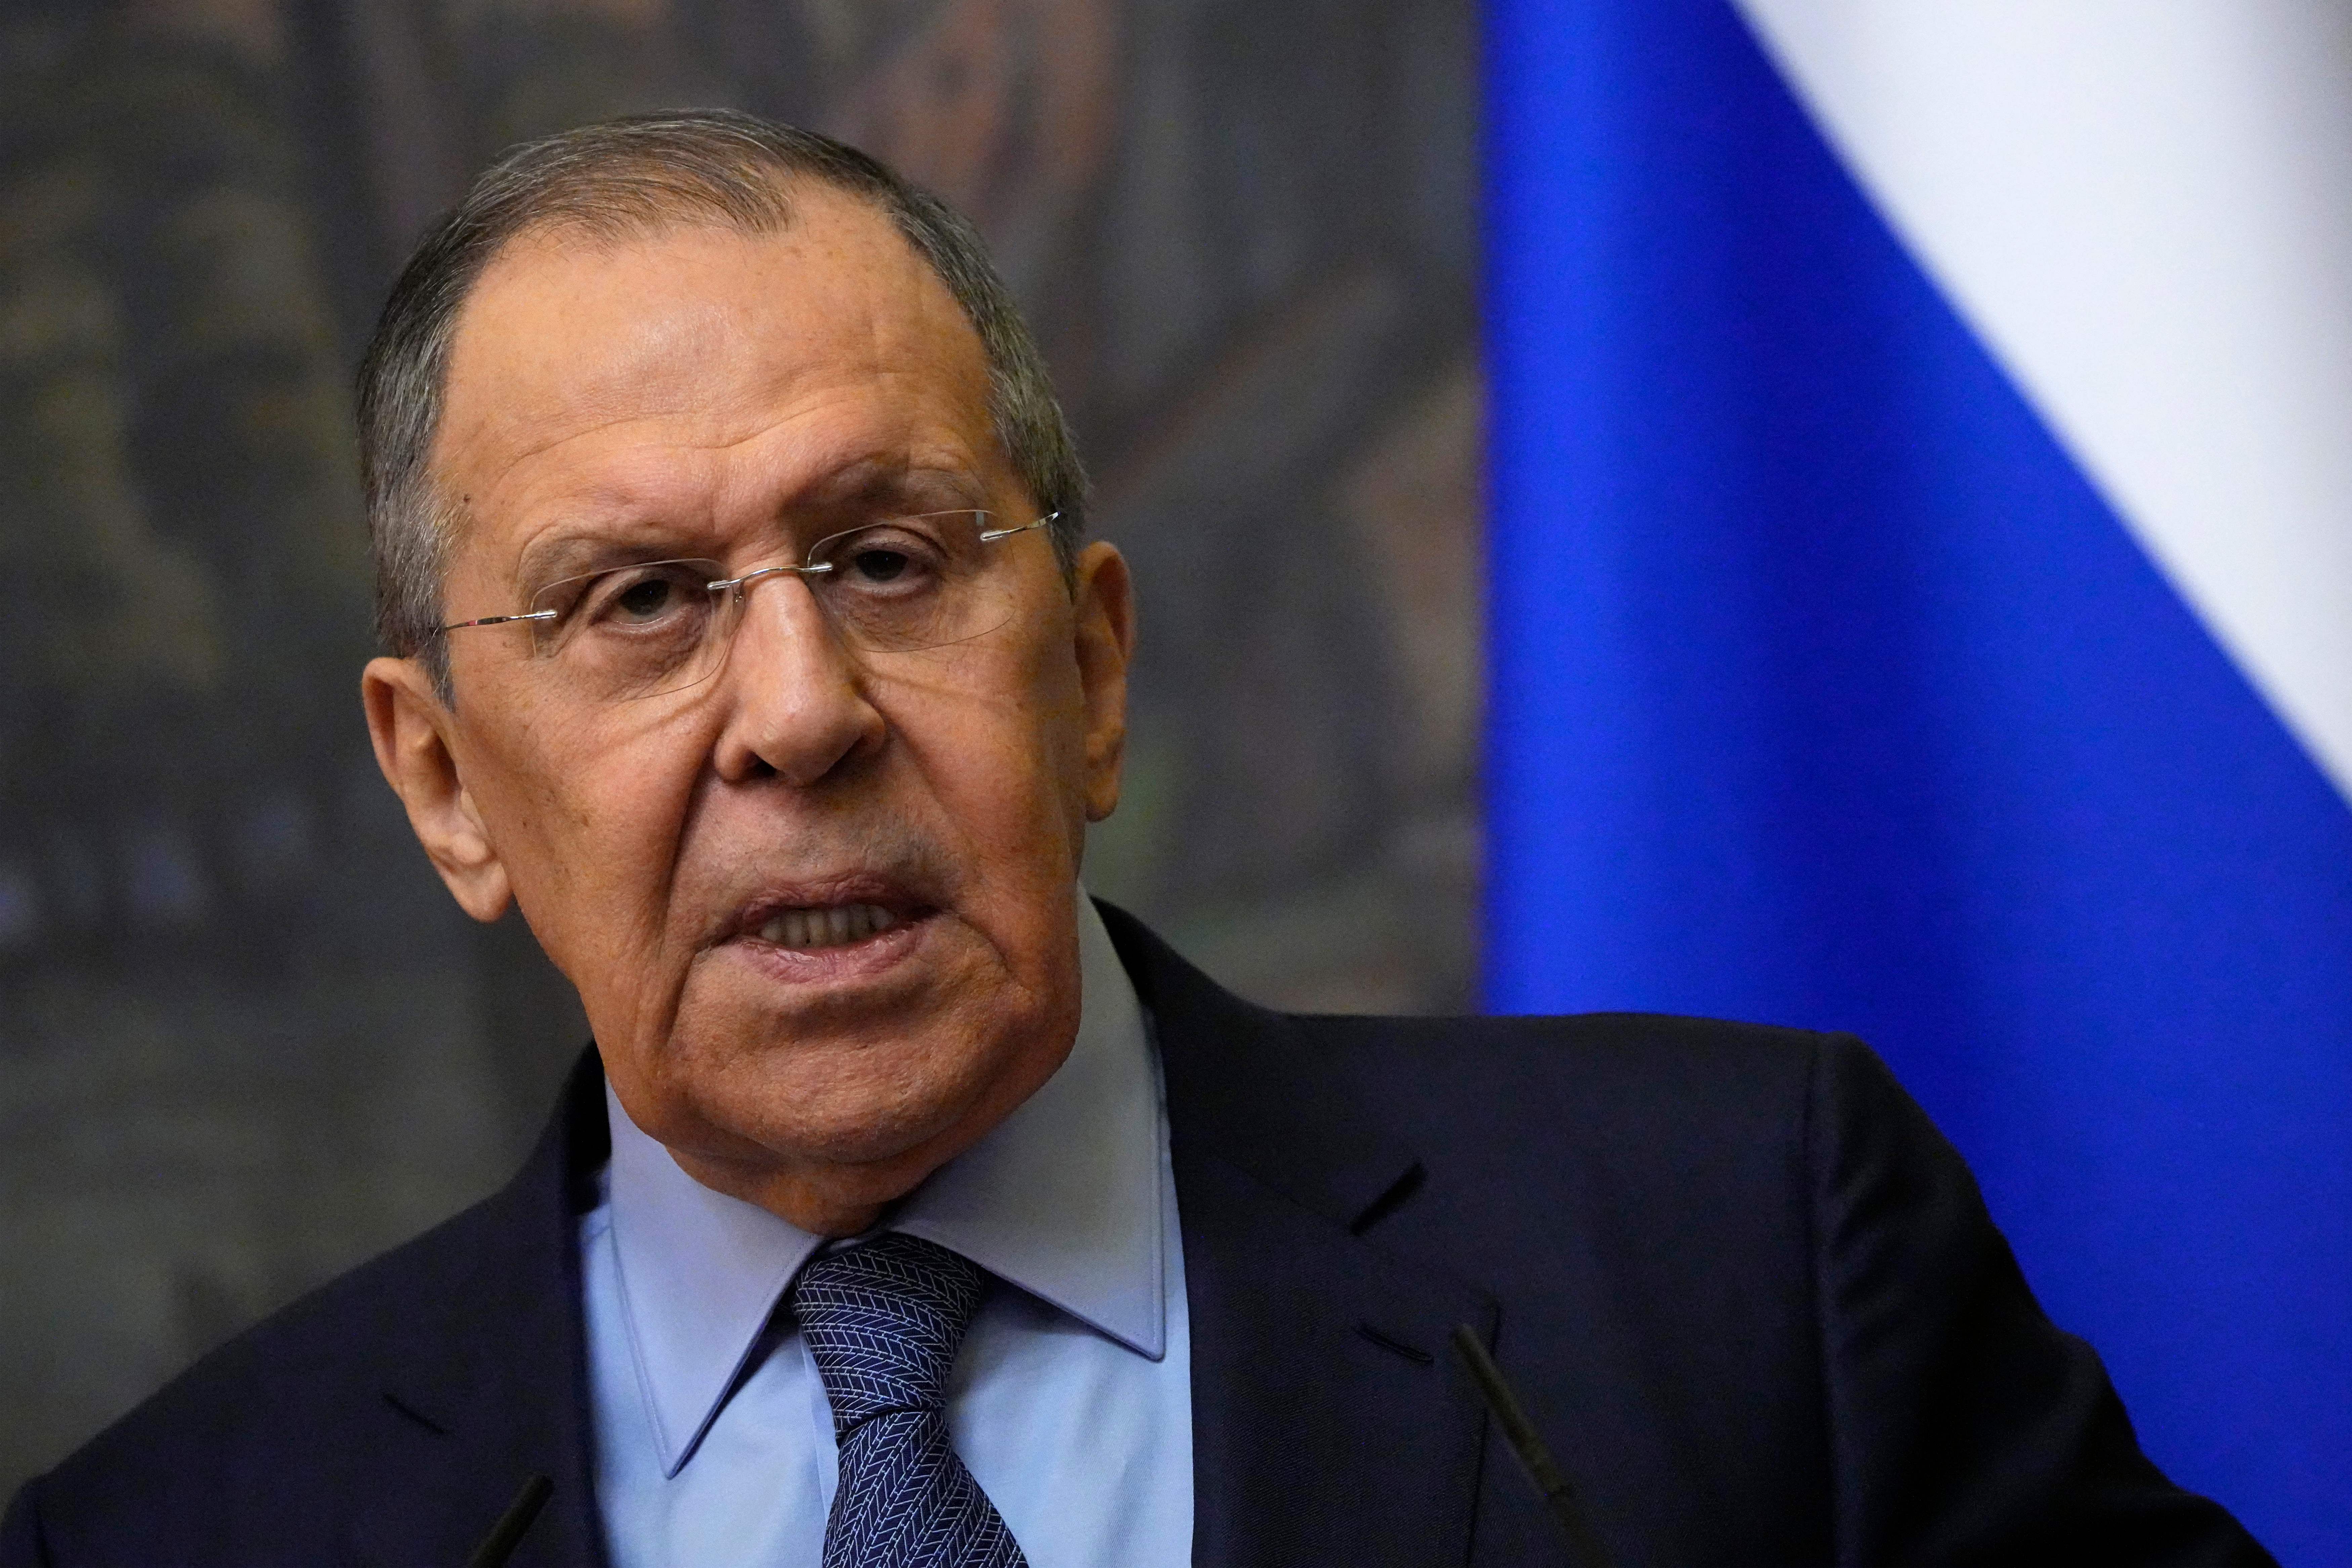 Russian foreign minister says new phase of Ukraine operation beginning